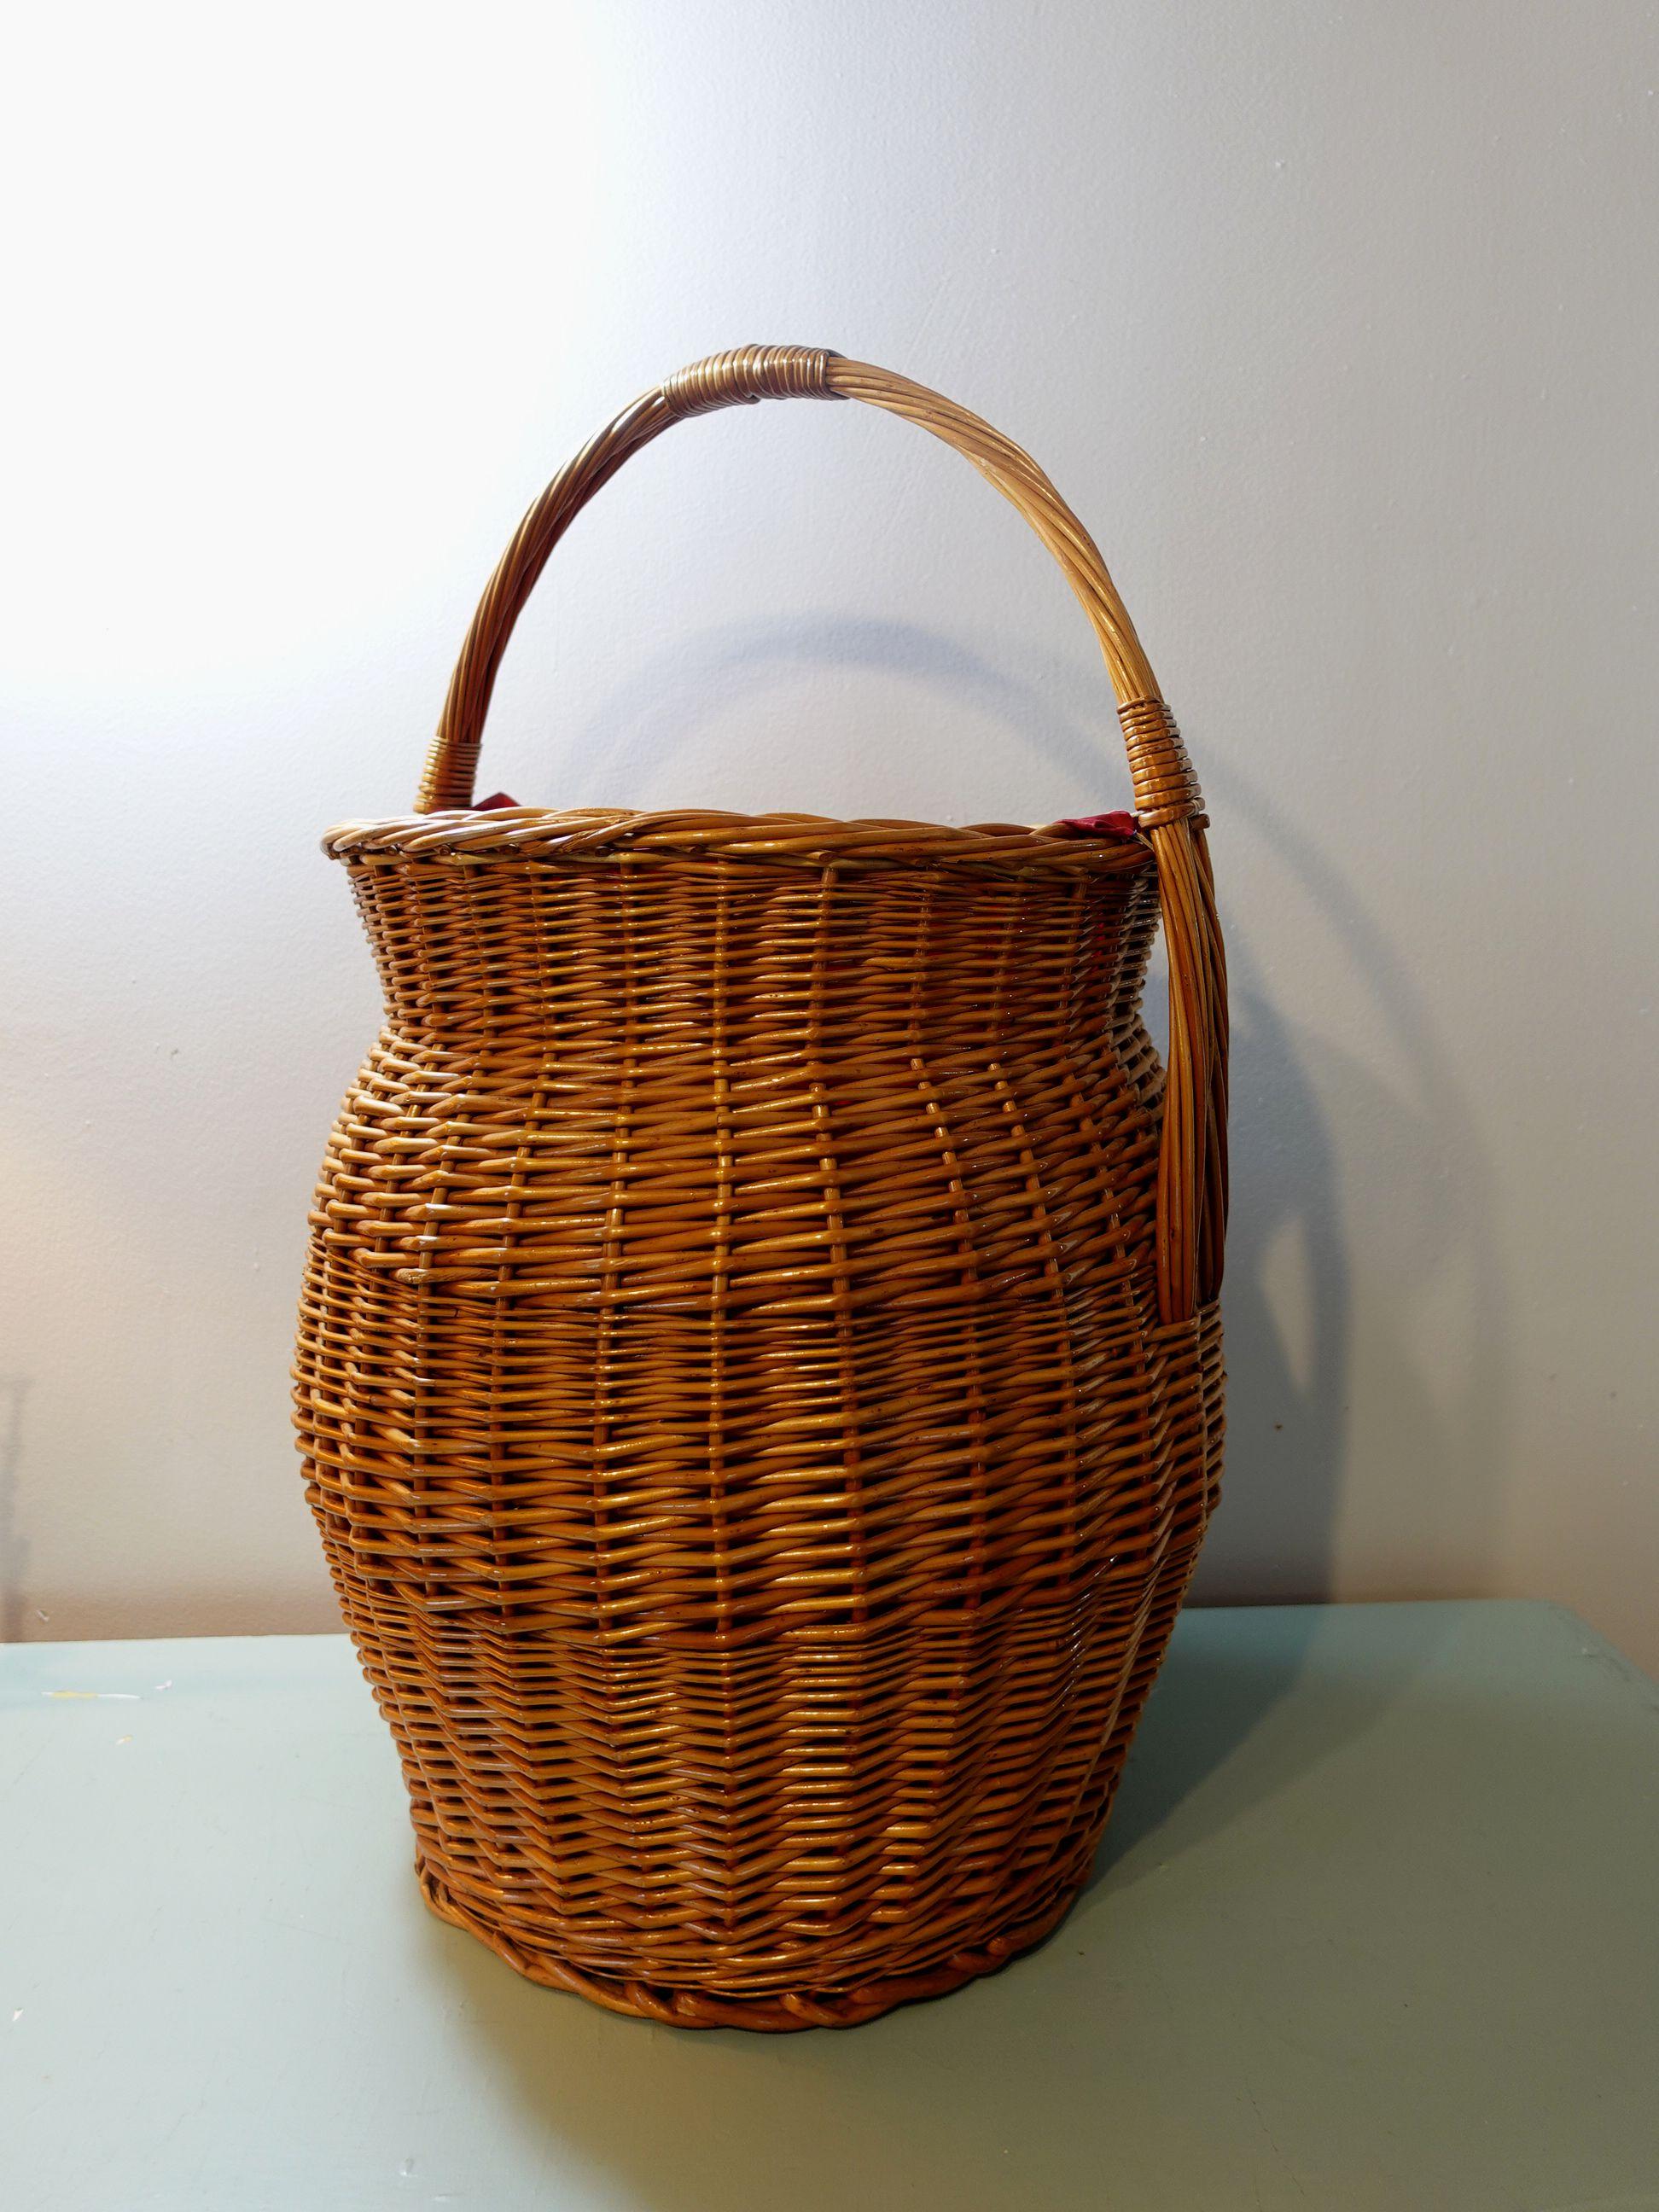 This is a very large and lovely vintage and fabric-lined basket with a half-moon handle. It's big enough to be a hamper. It appears to be quite solidly made, with no structural issues whatever. Even the fabric looks clean, but it's vintage. Good